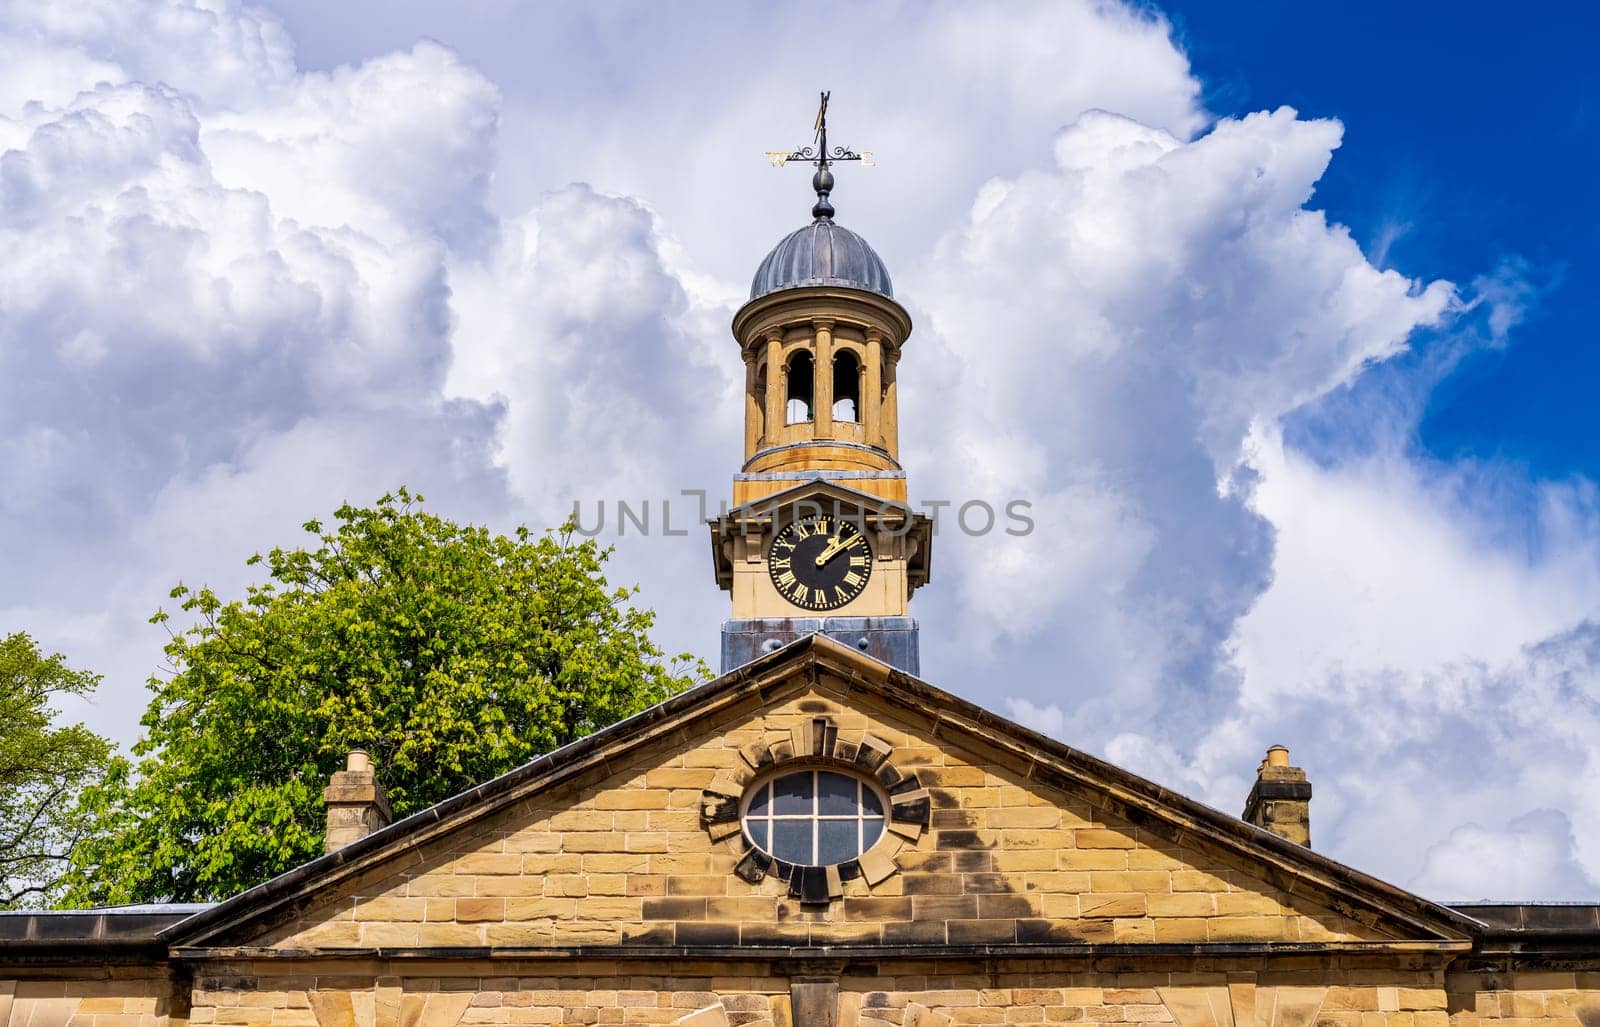 Sunlit clock tower of stone stable block with dramatic sky by steheap